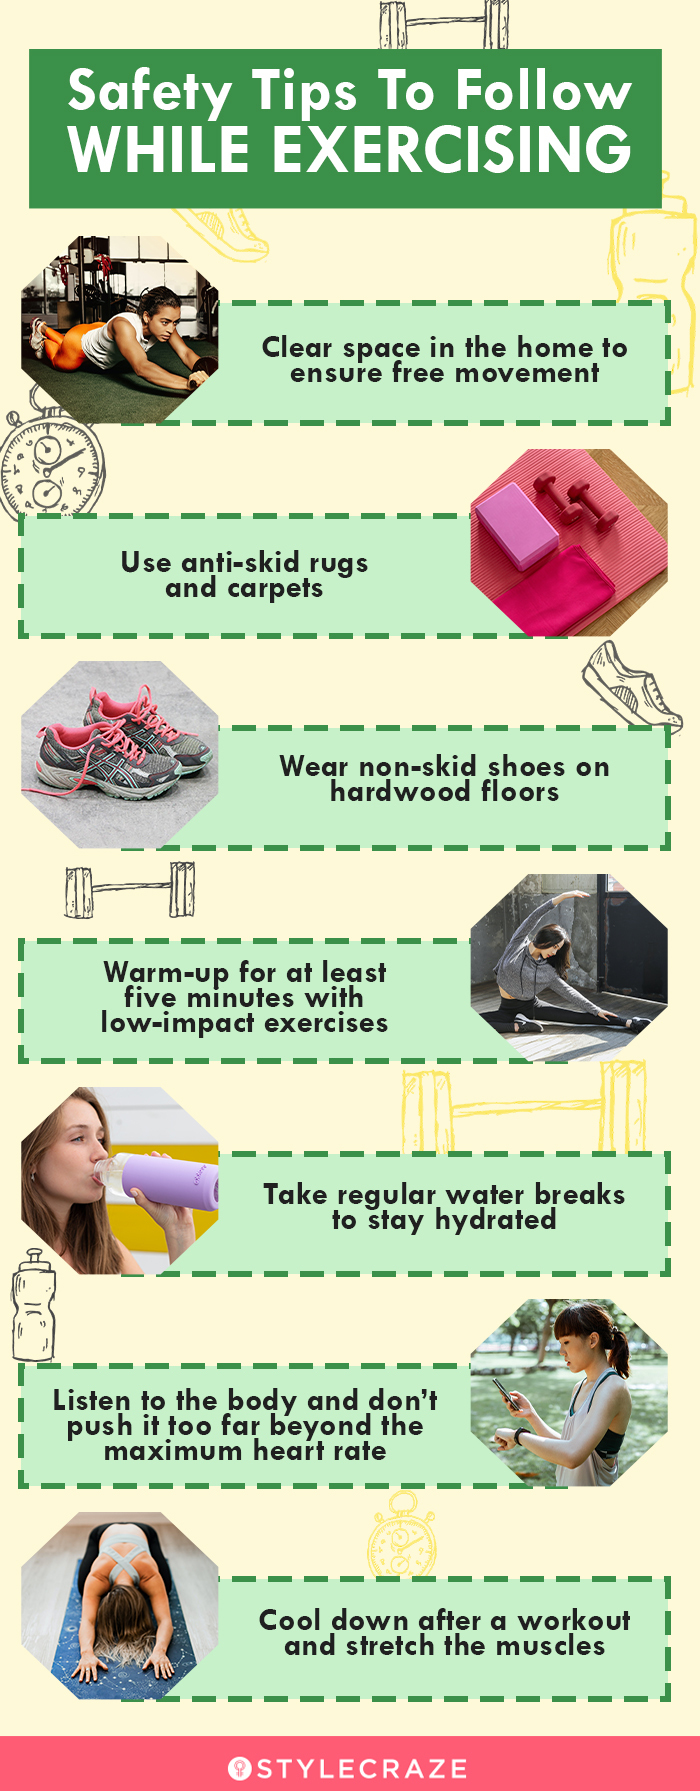 safety tips during exercise (infographic)